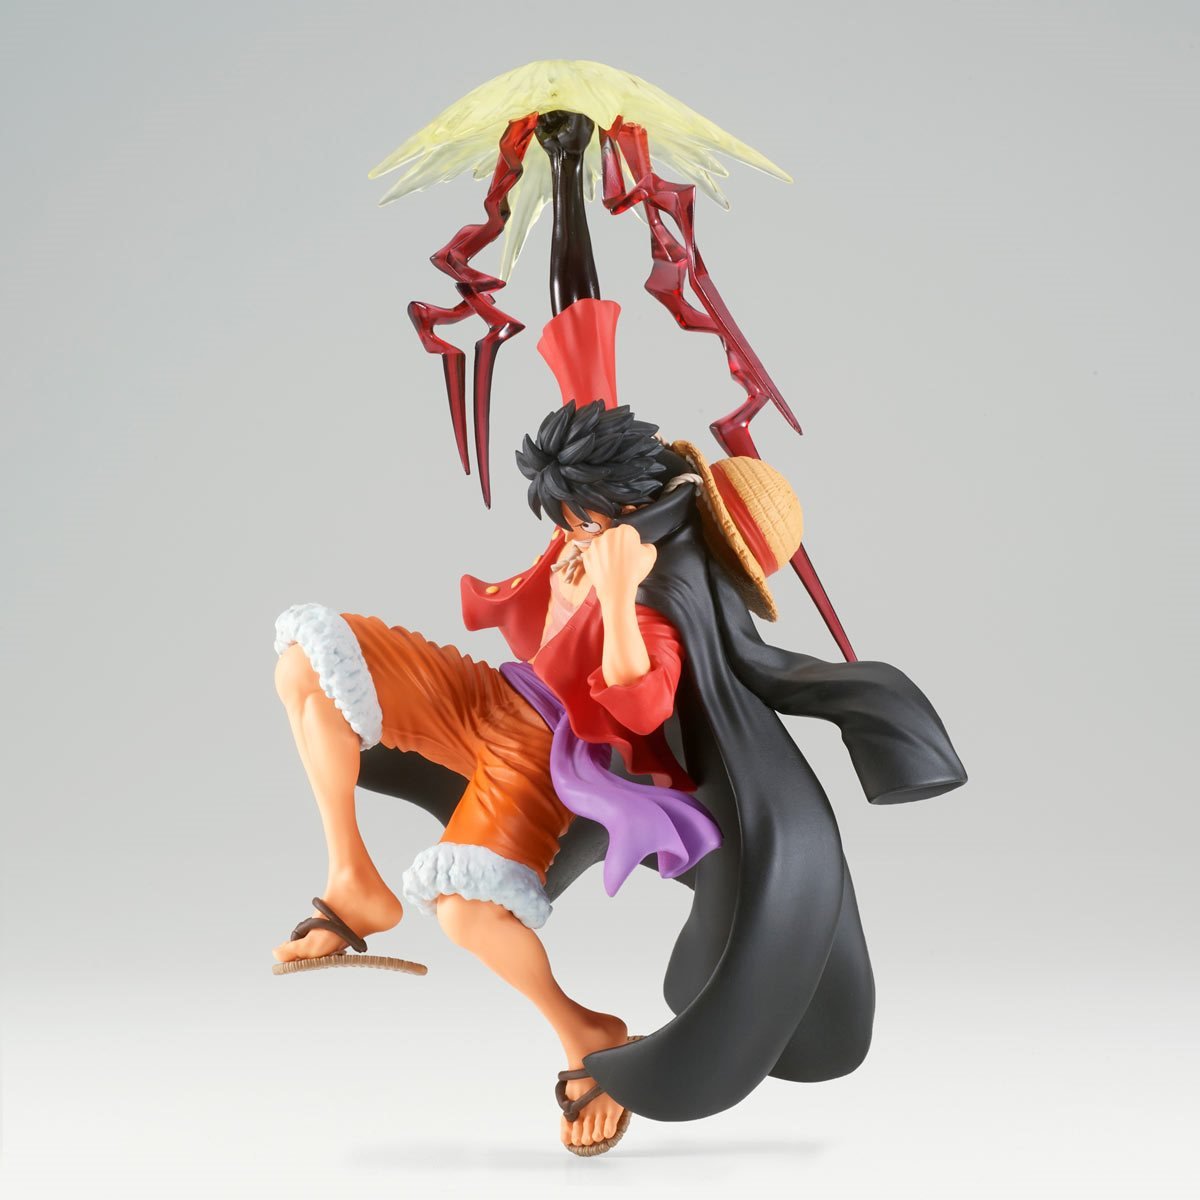 One Piece Battle Record Collection Monkey D. Luffy (Gear 5)